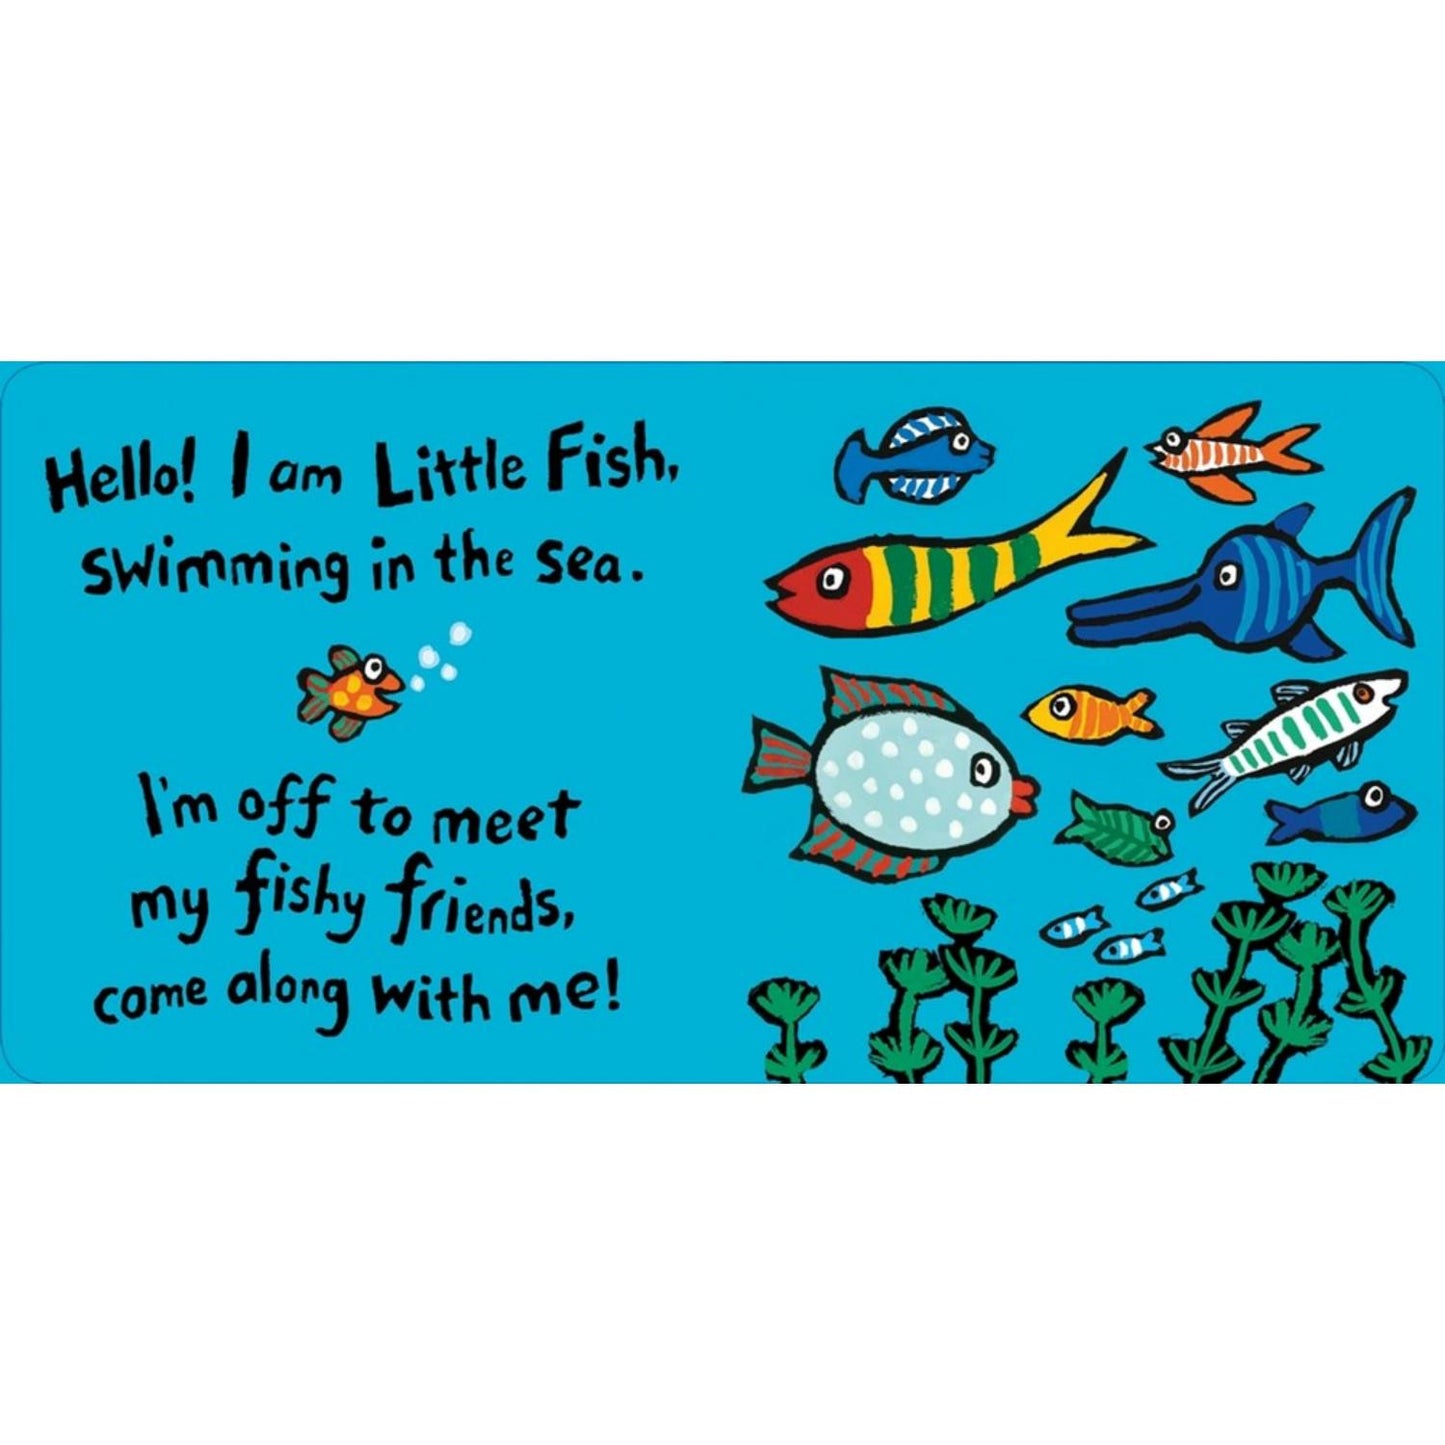 Hello, Little Fish! A Mirror Book | Interactive Board Book for Babies & Toddlers